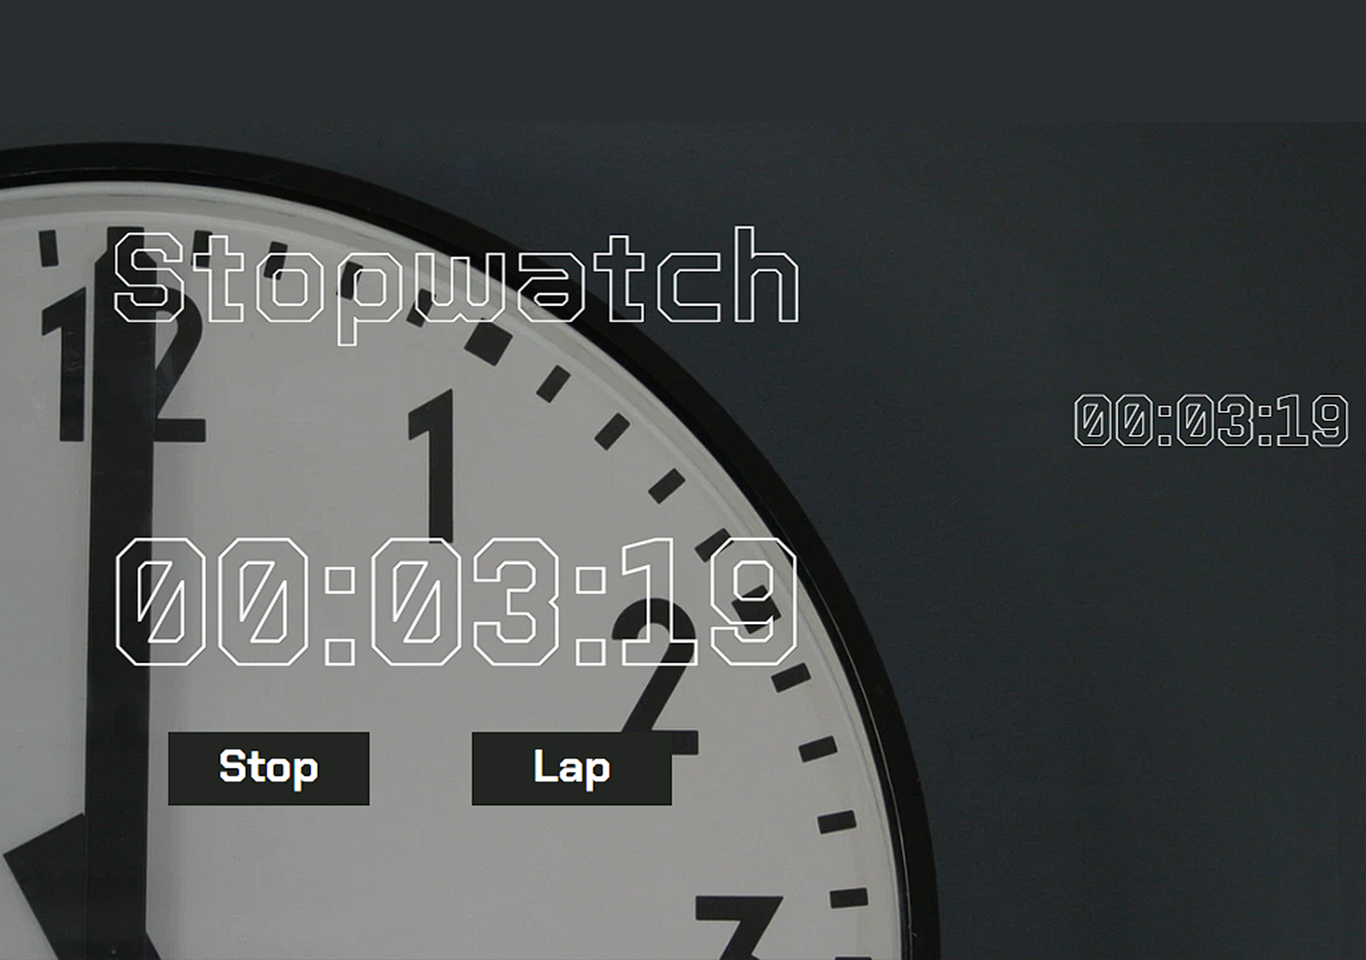 Stopwatch app in Js with Source code